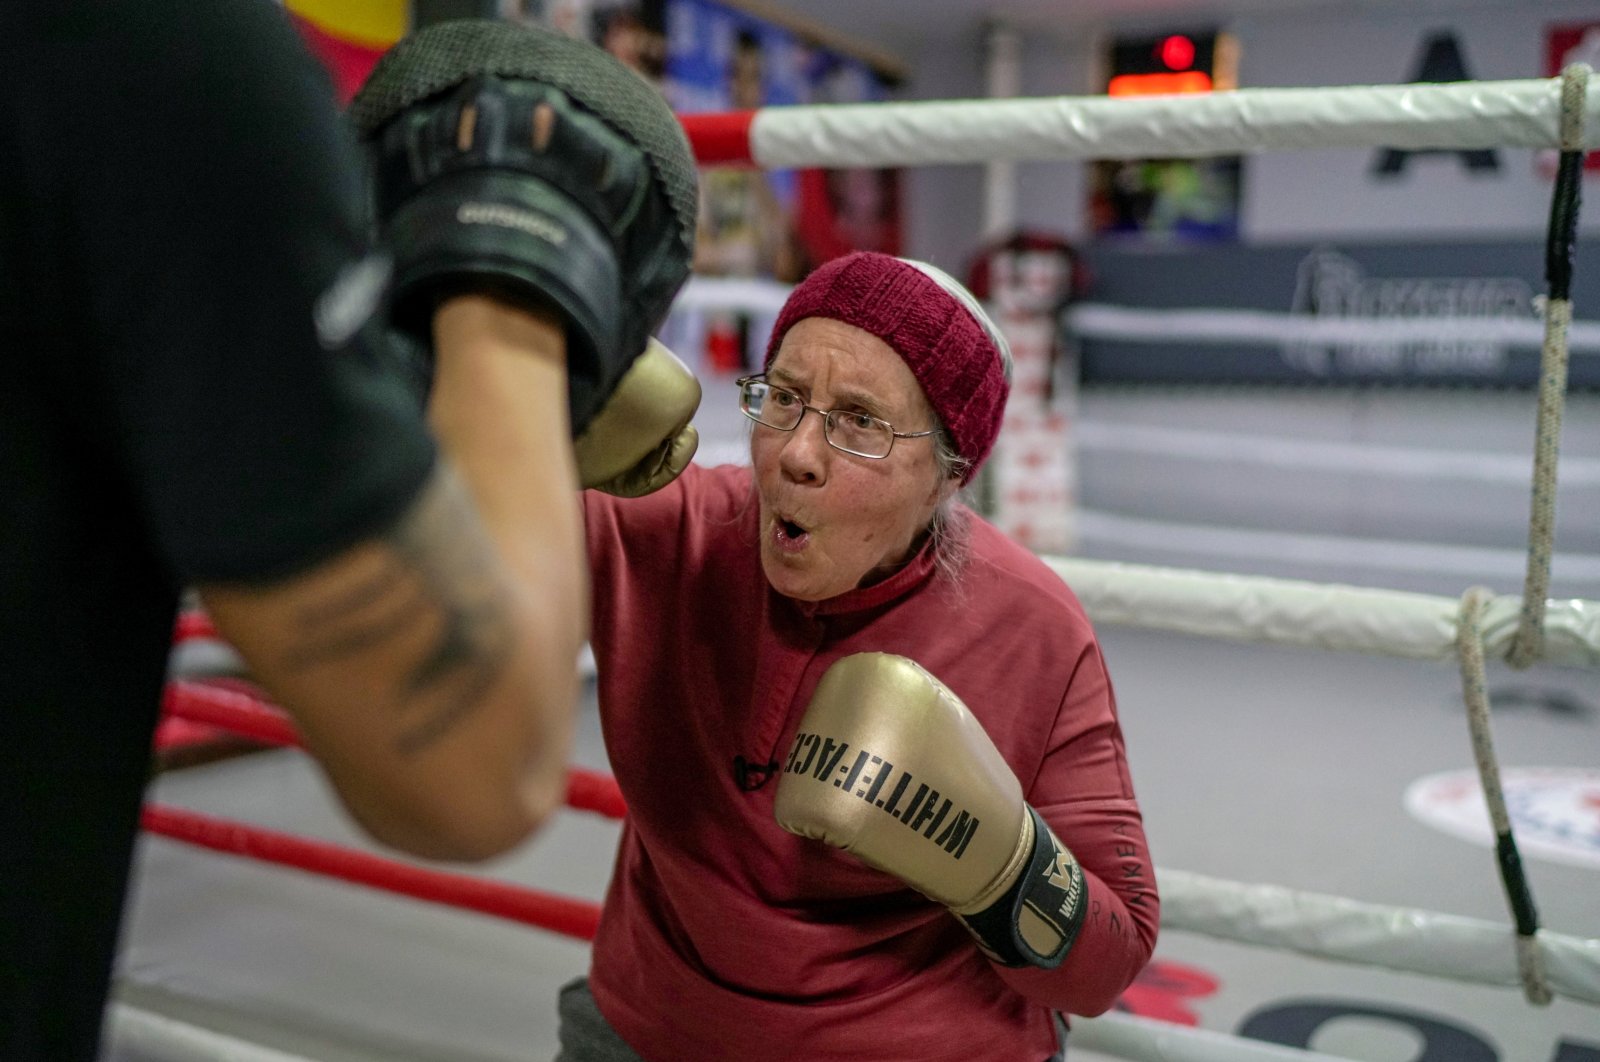 Nancy van der Straeten practices boxing with her trainer Muhammed Ali Kardaş at a boxing club in the southern resort city of Antalya, Turkey, Feb. 26, 2021. (REUTERS Photo)